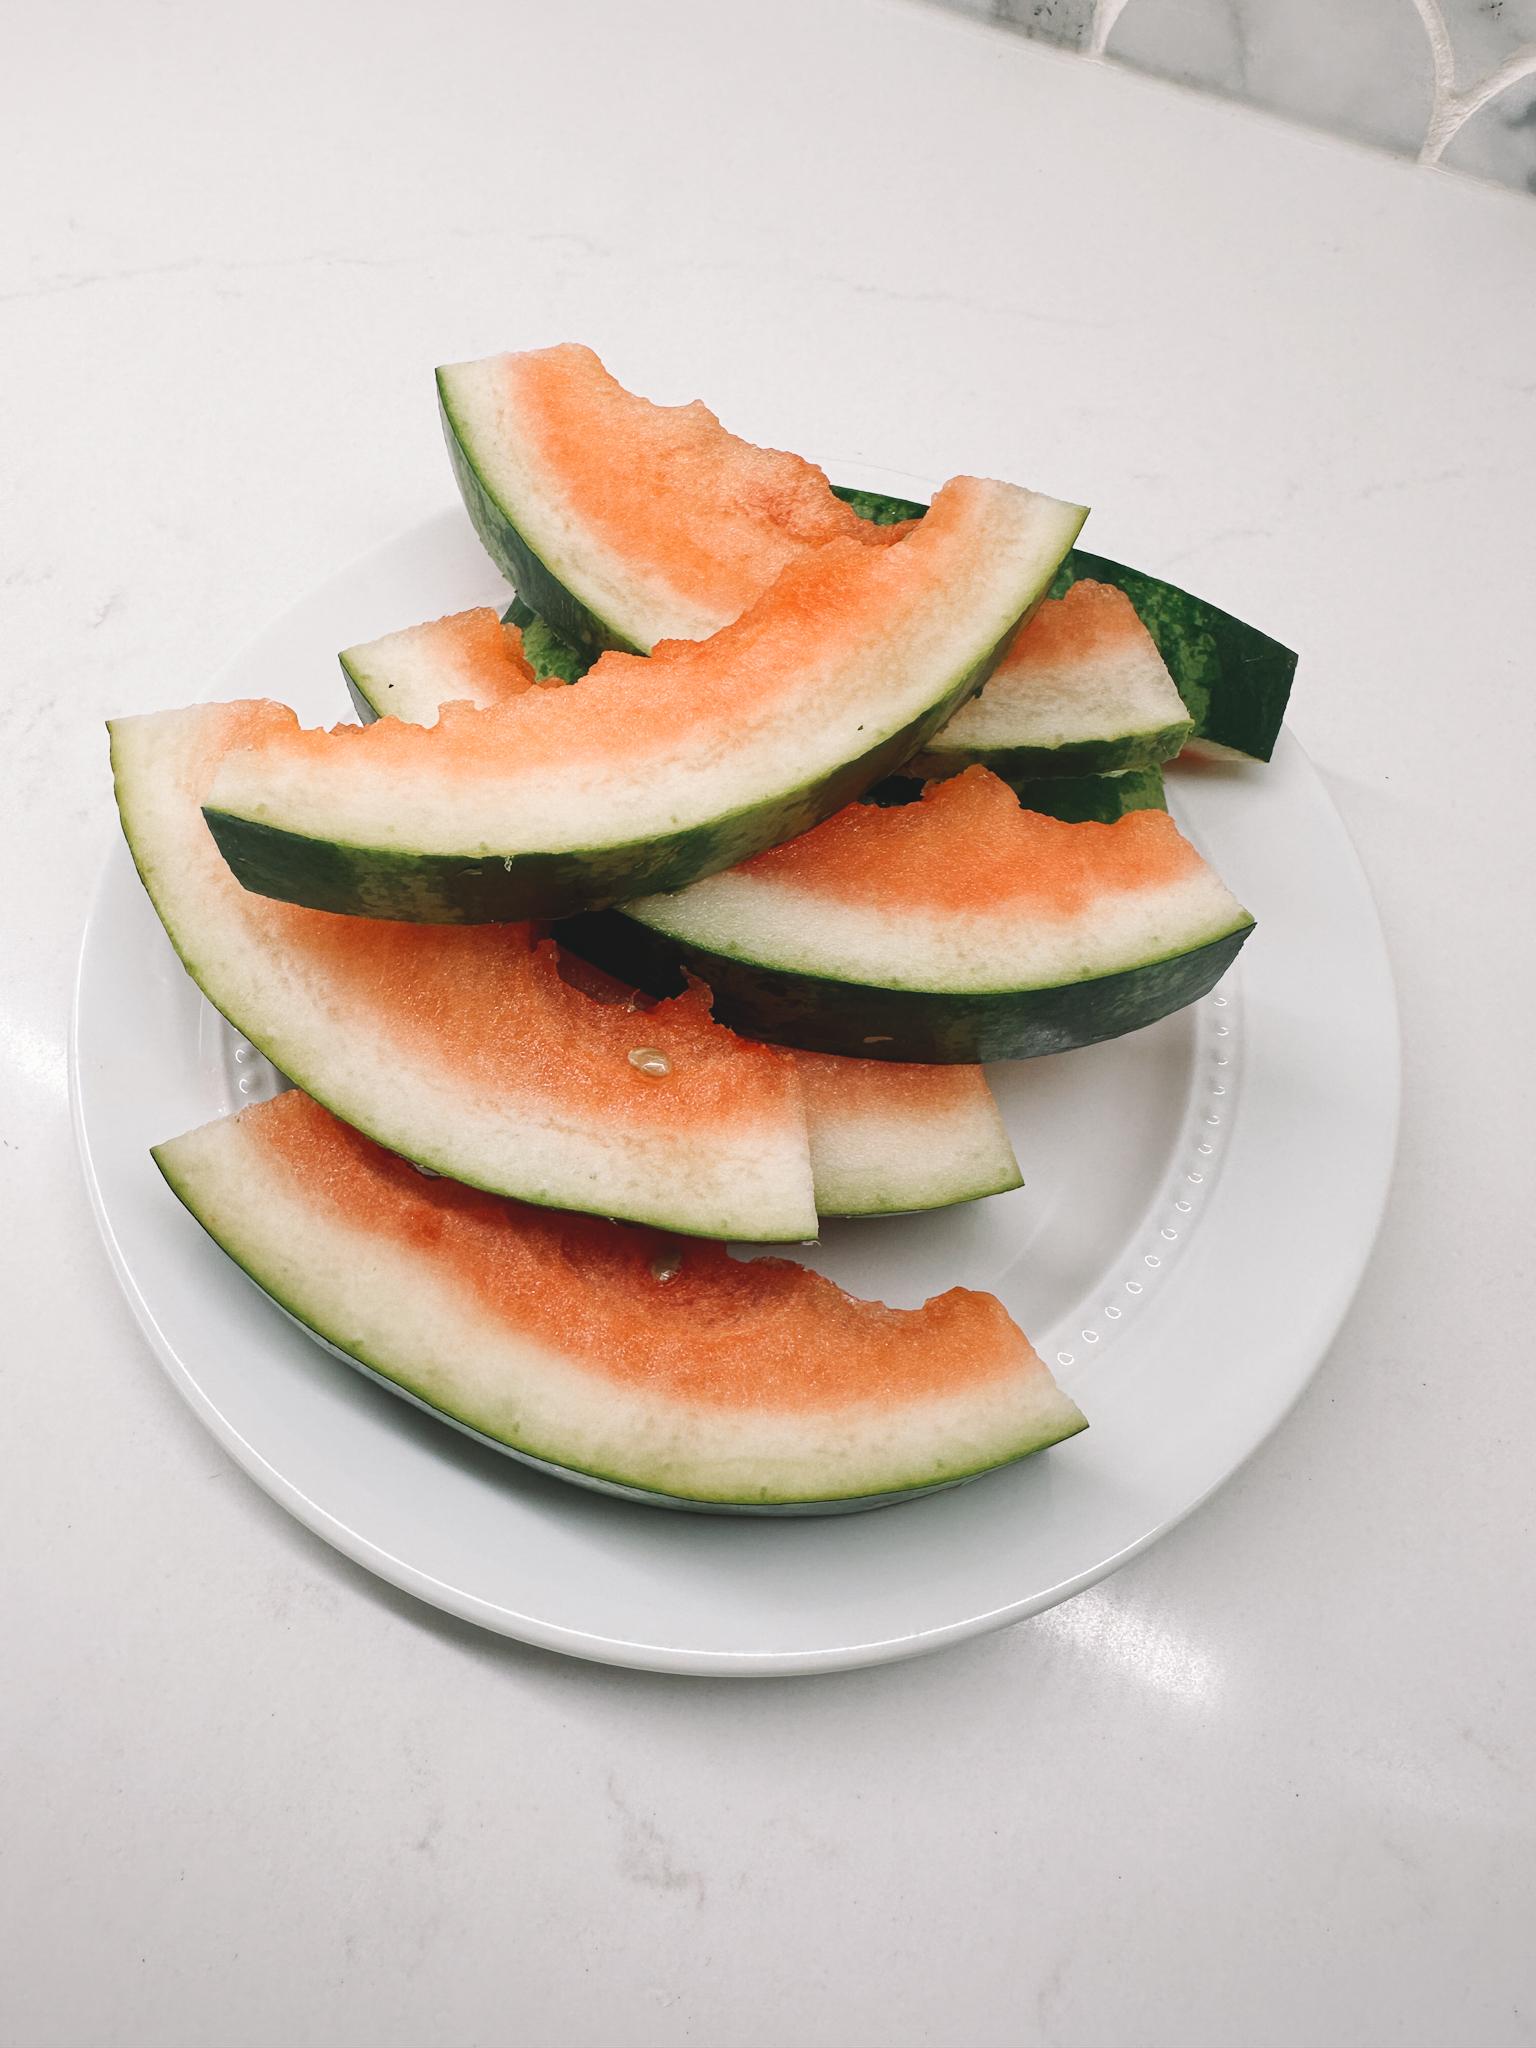 eaten slices of watermelons